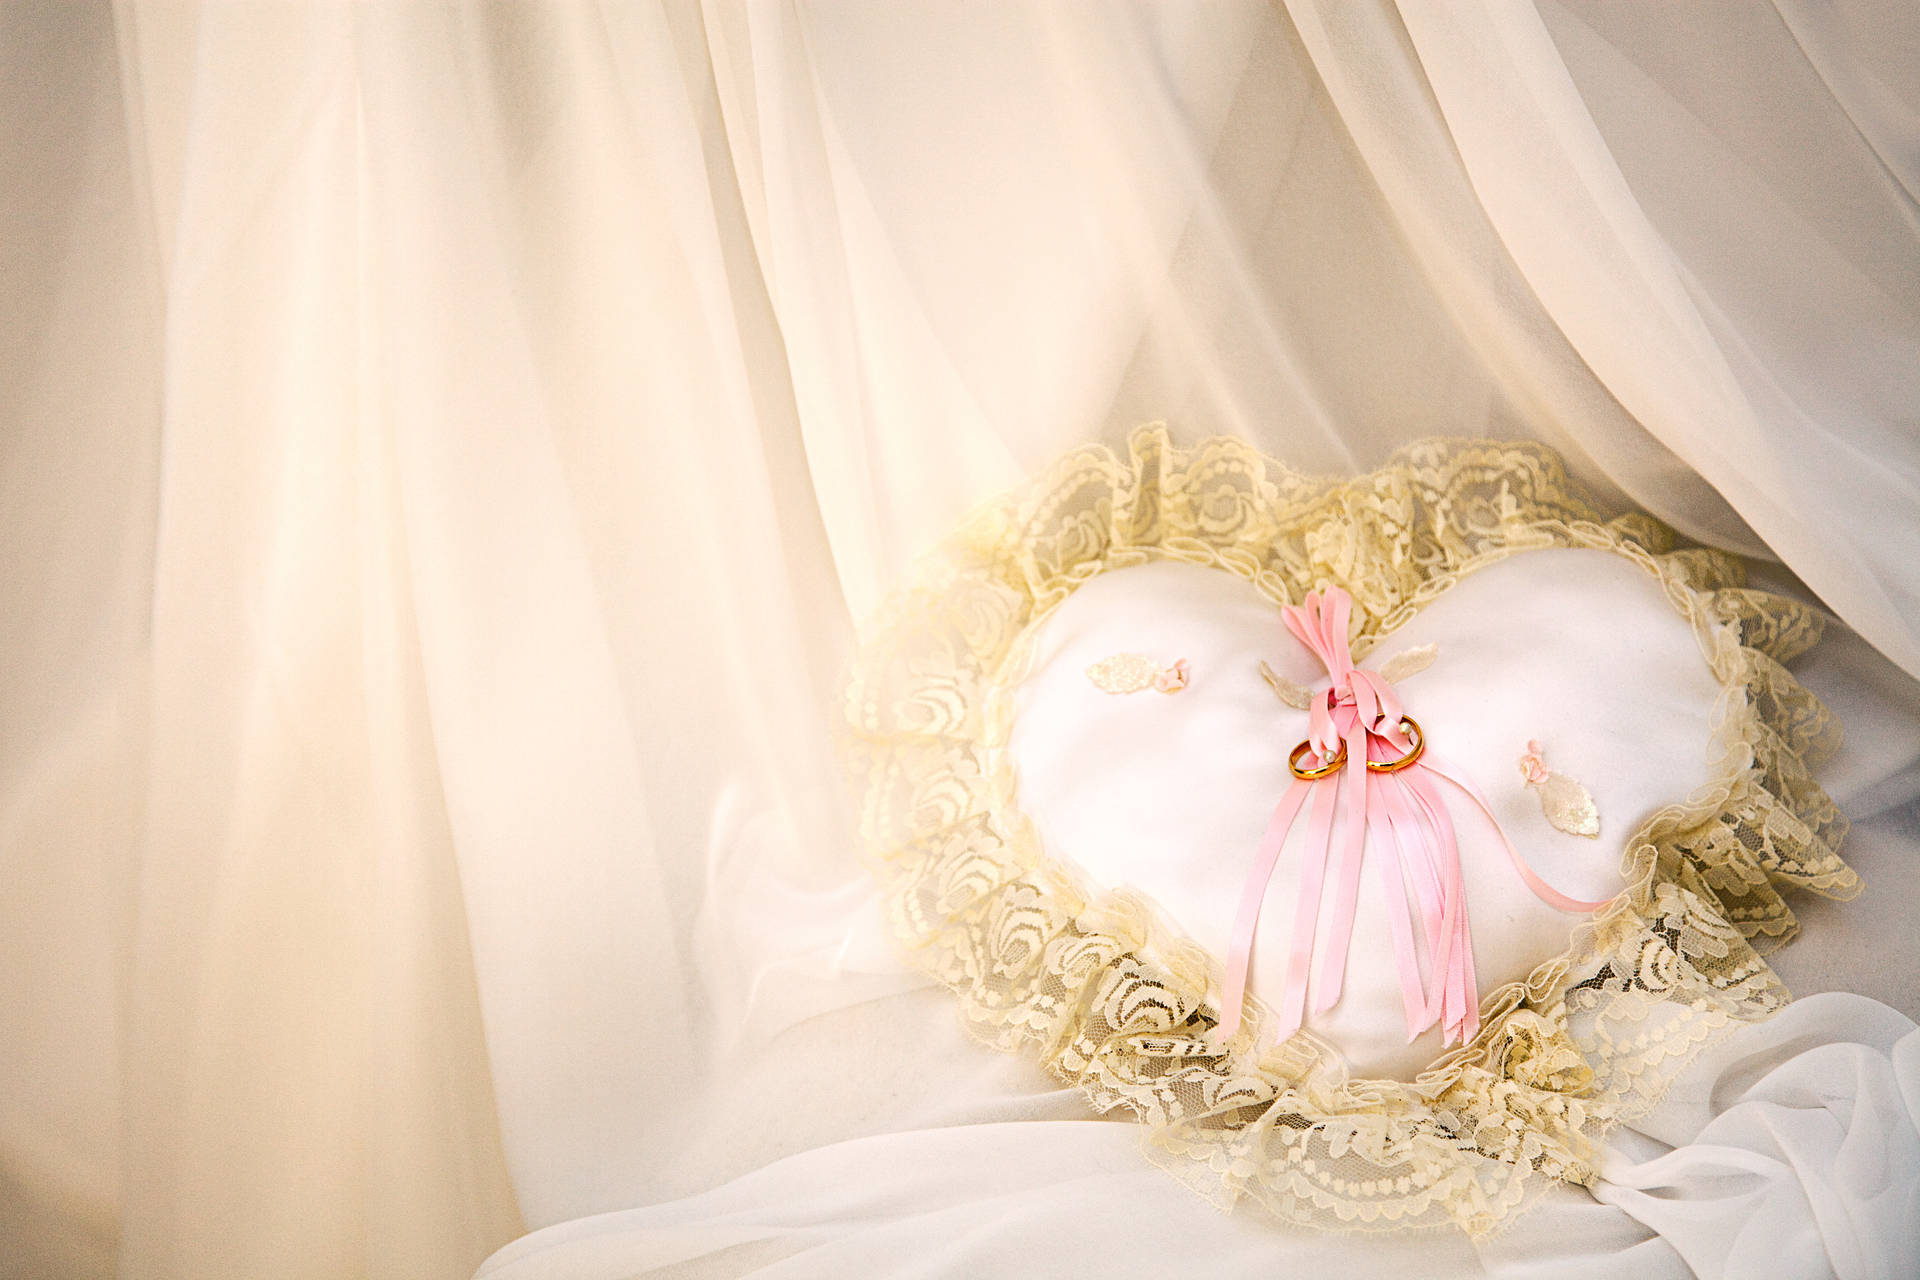 5616X3744 Wedding Wallpaper and Background